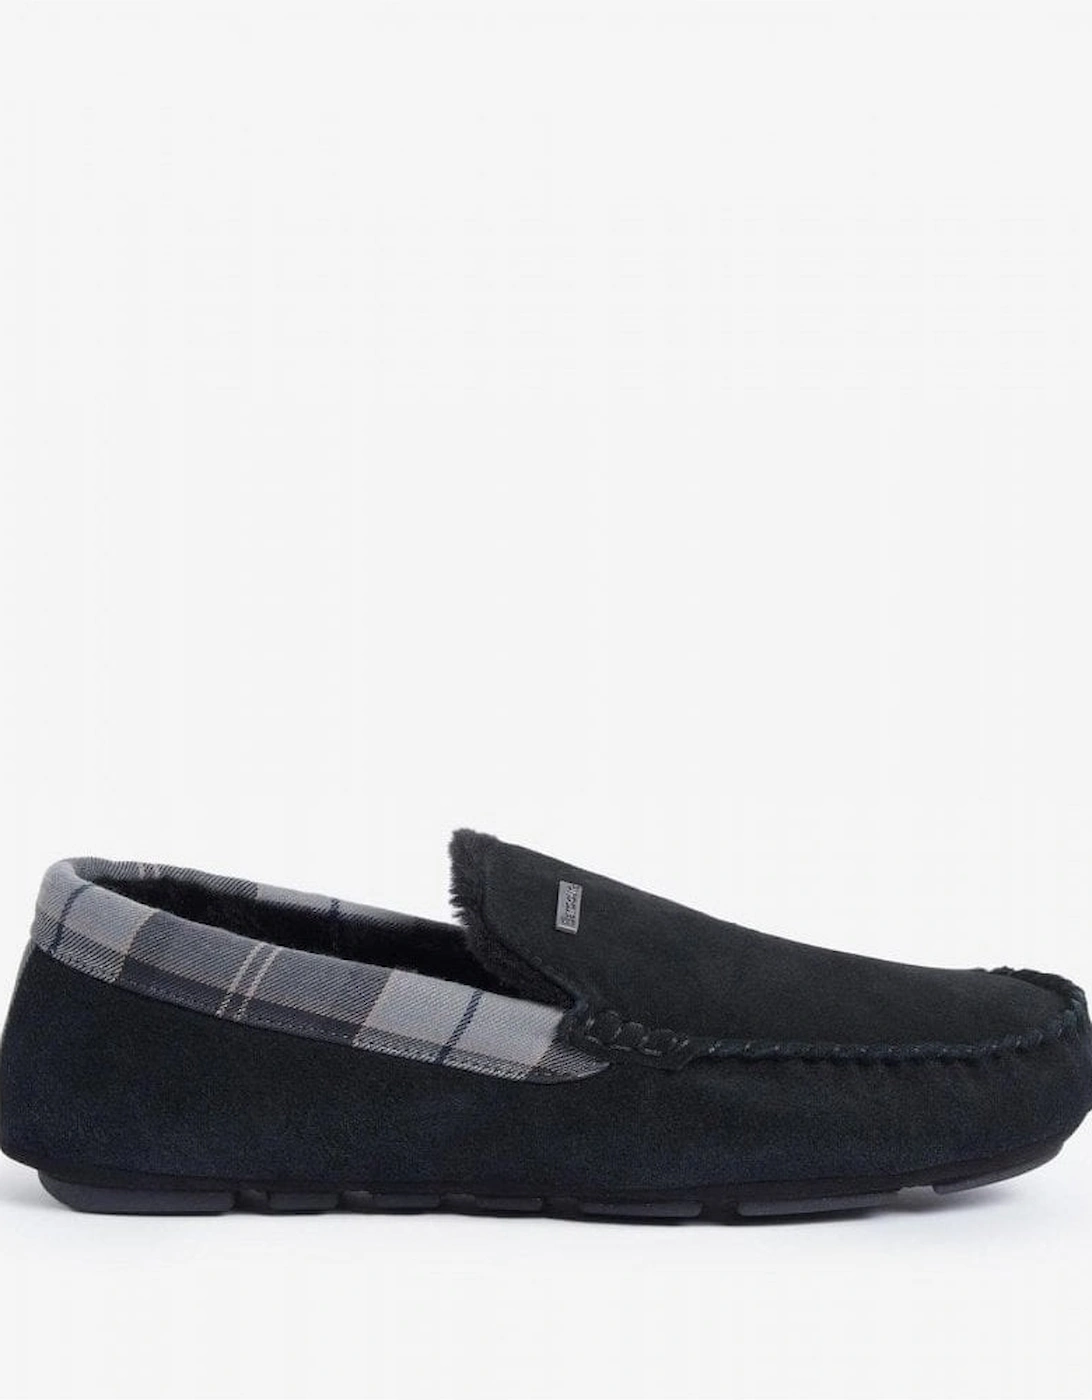 Monty Moccasin Mens Slippers